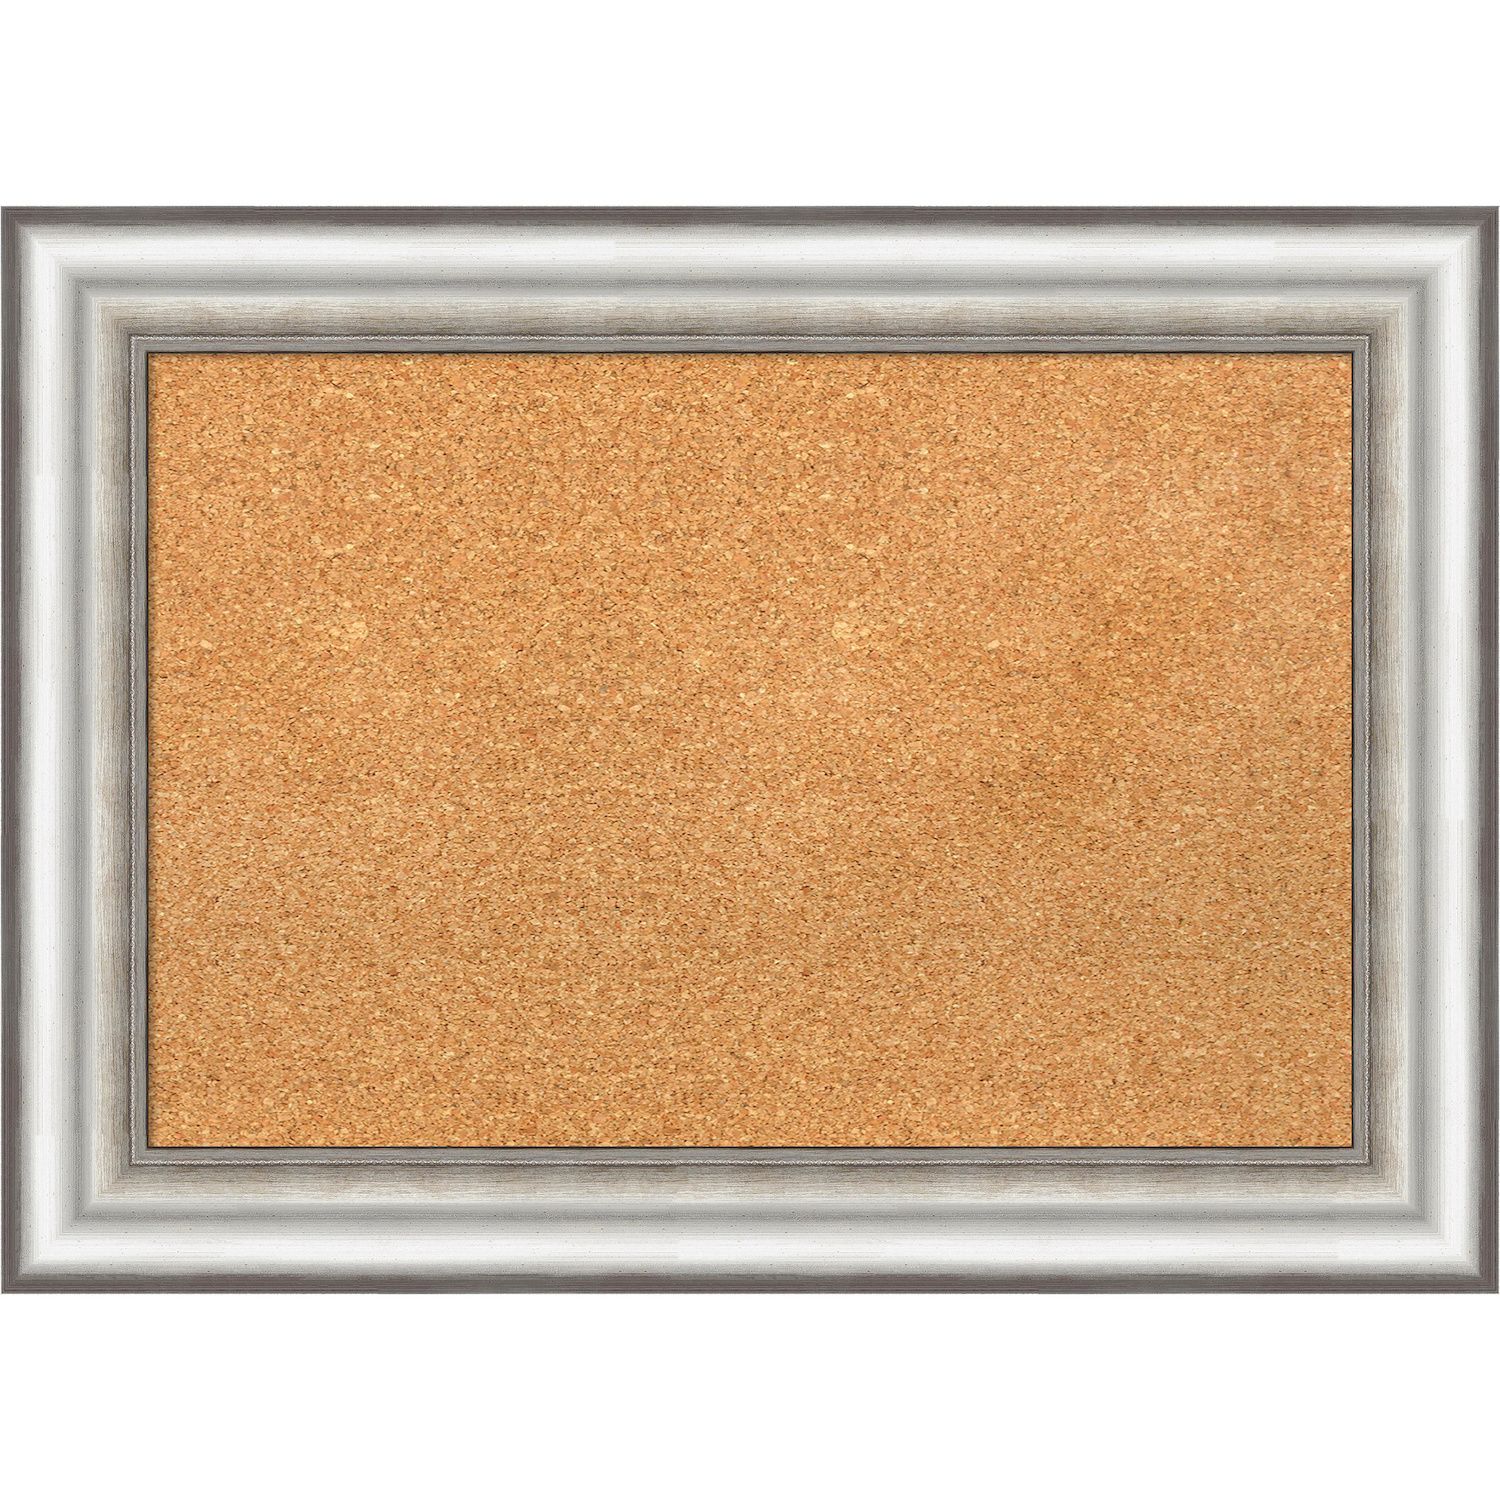 Juvale 3-Pack Cork Bulletin Boards - Hexagonal Decorative Tiles in 3 with 6 Pins